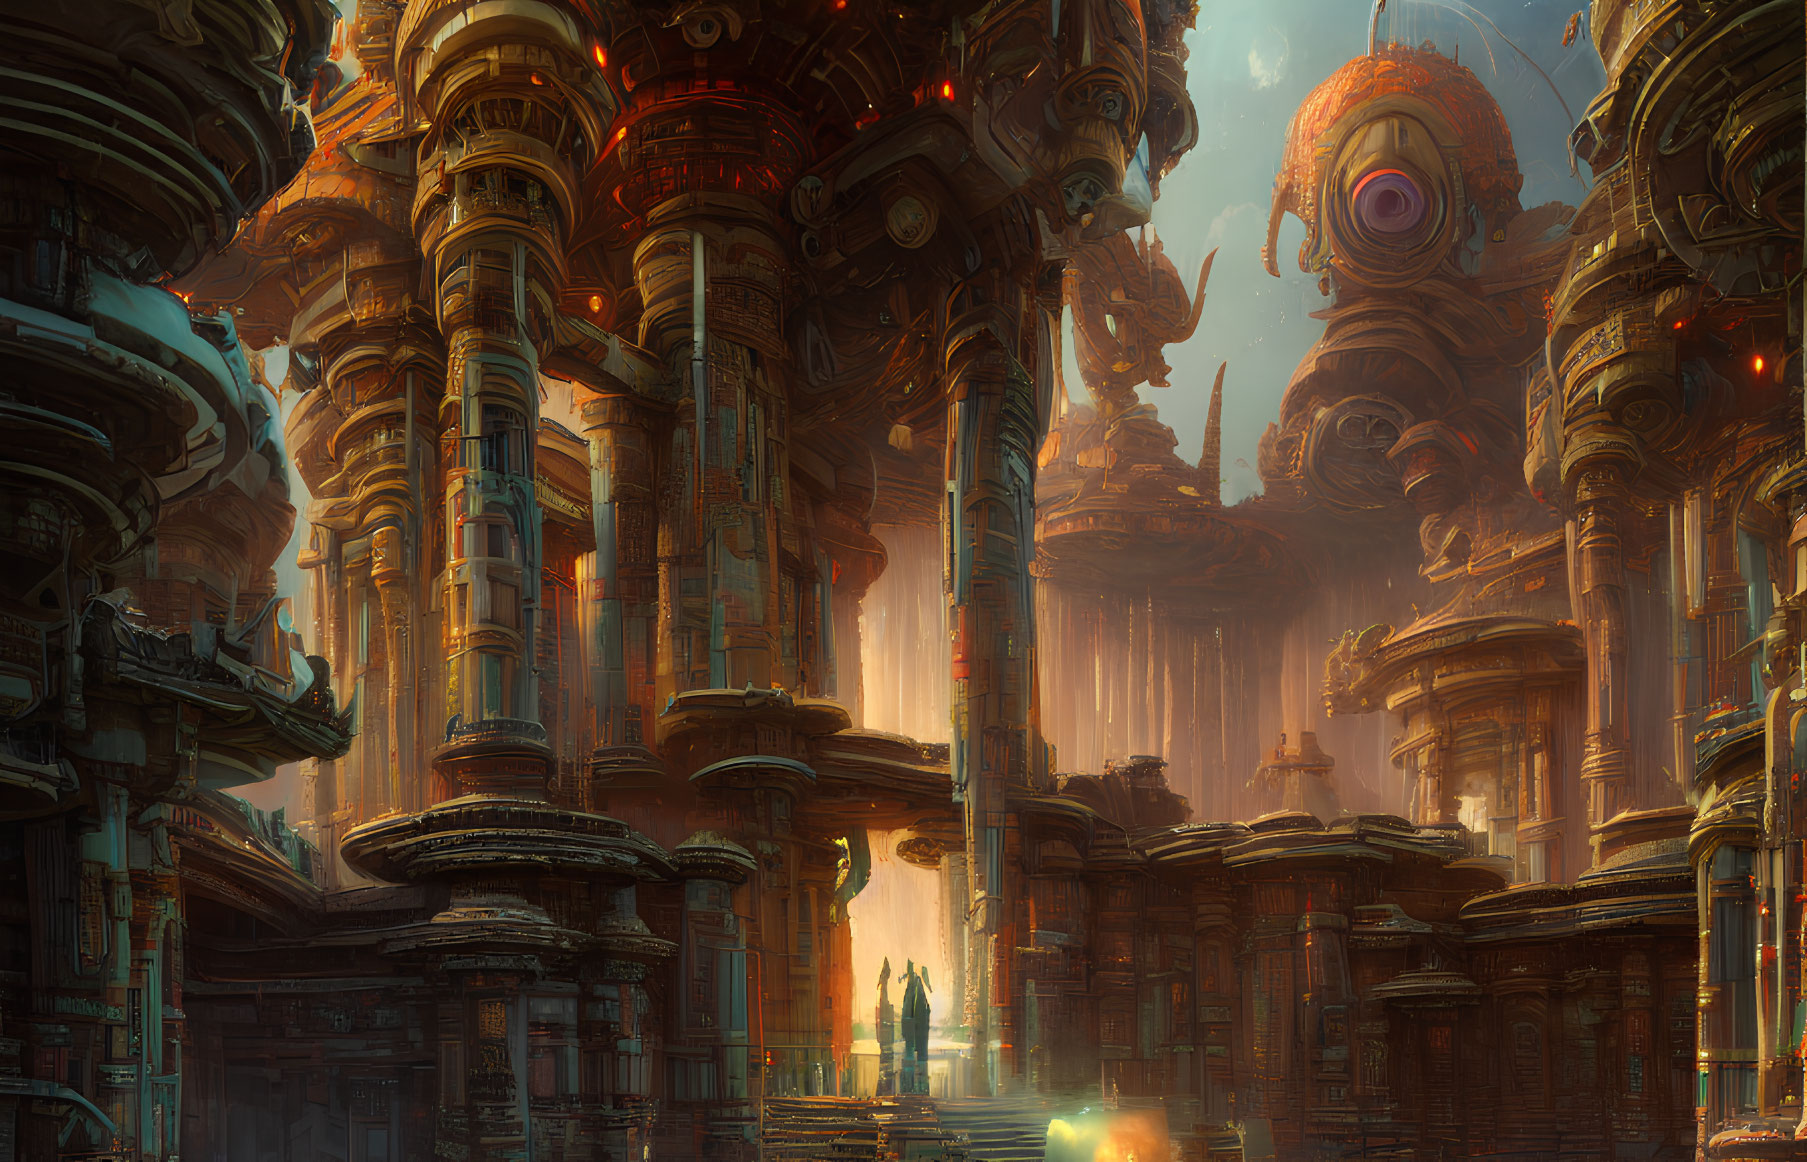 Futuristic cityscape with towering, ornate structures